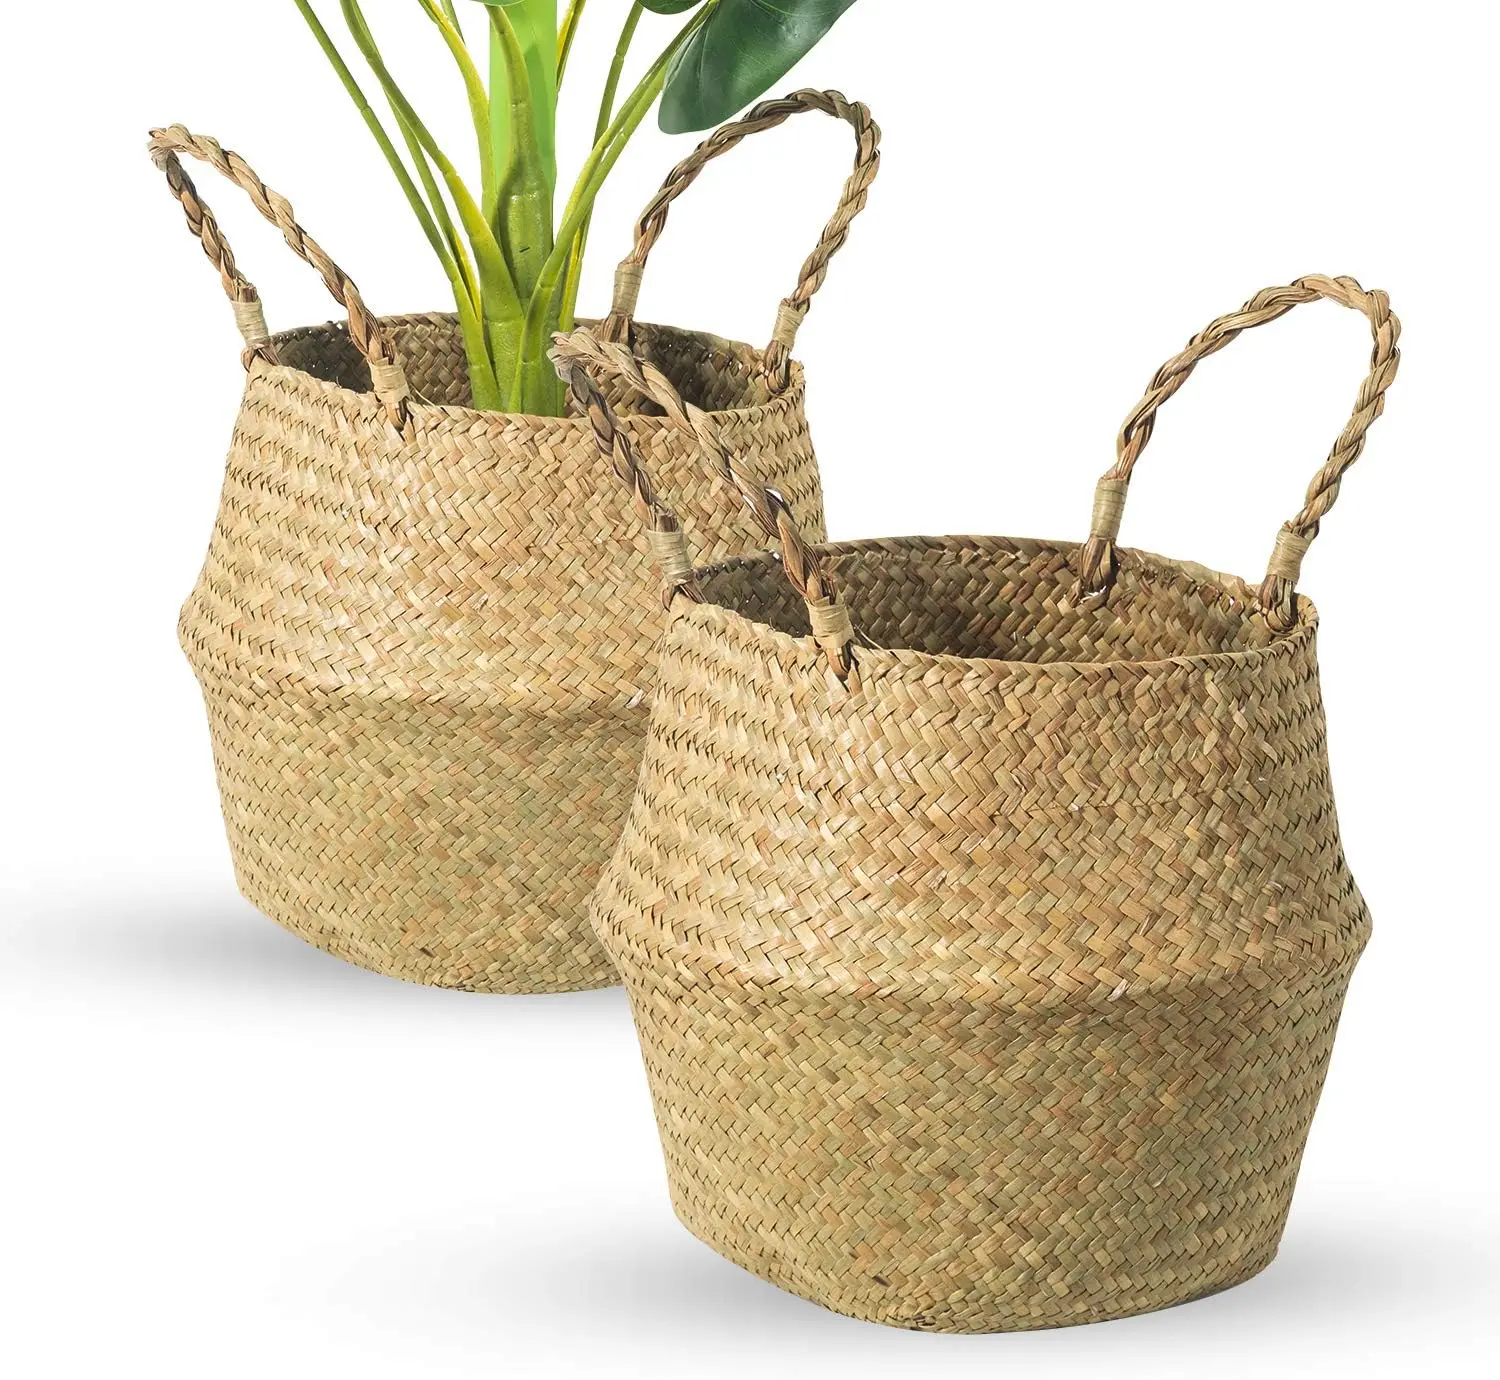 Seagrass Belly Basket, Set of 2 Woven Plant Pot Holder handmade Home Decor for Storage Plants Picnic Grocery Medium